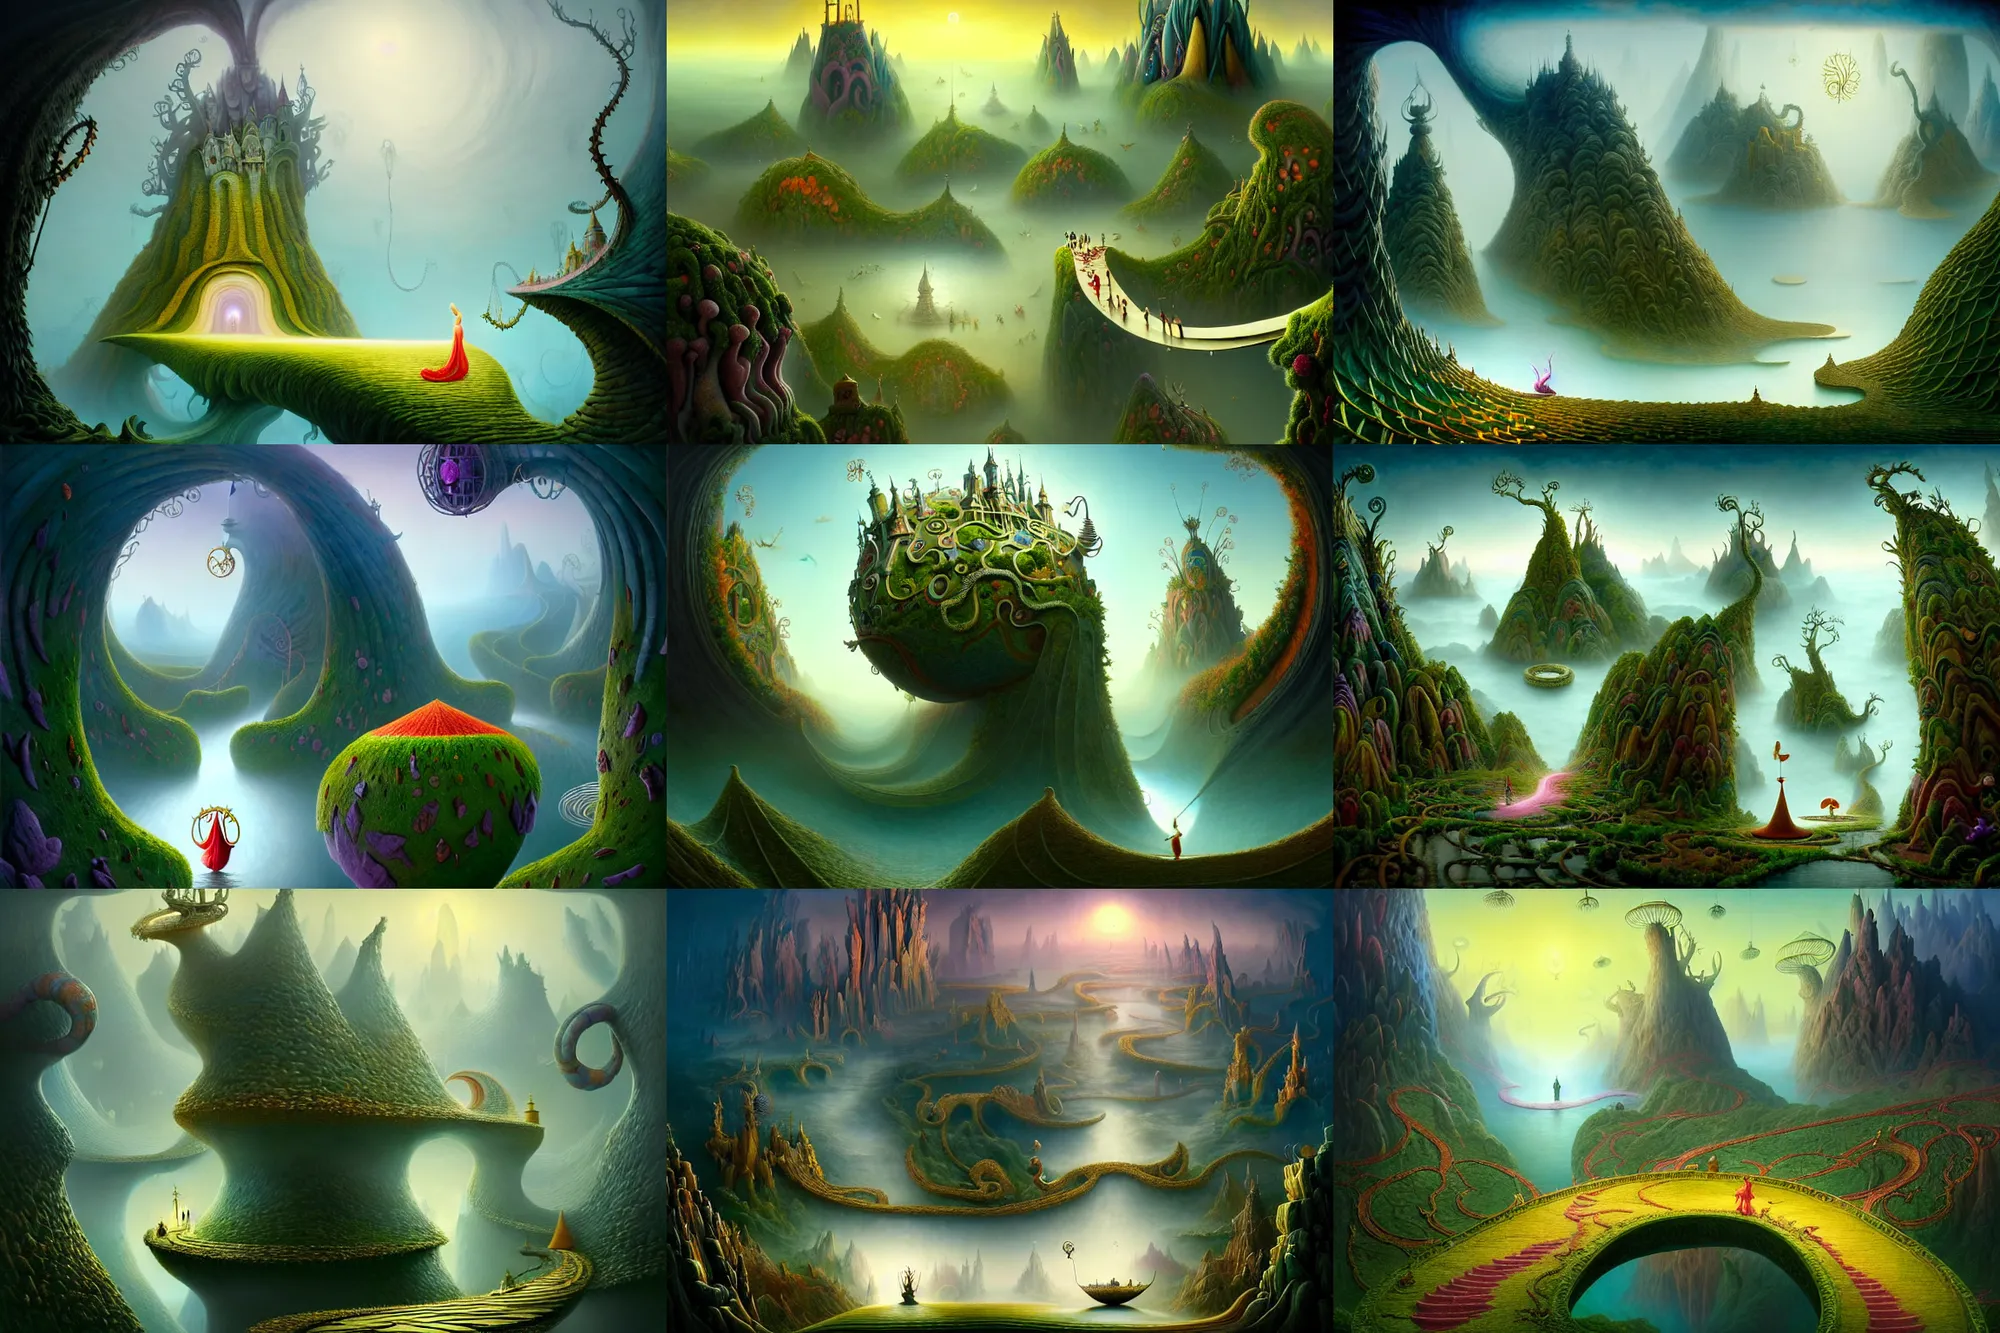 Prompt: a beguiling epic stunning beautiful and insanely detailed matte painting of the impossible winding path in a dream world with surreal architecture designed by Heironymous Bosch, dream world populated with mythical whimsical creatures, mega structures inspired by Heironymous Bosch's Garden of Earthly Delights, vast surreal landscape and horizon by Cyril Rolando and Tyler Edlin and Mike Azevedo, masterpiece!!!, grand!, imaginative!!!, whimsical!!, epic scale, intricate details, sense of awe, elite, wonder, insanely complex, masterful composition!!!, sharp focus, fantasy realism, dramatic lighting